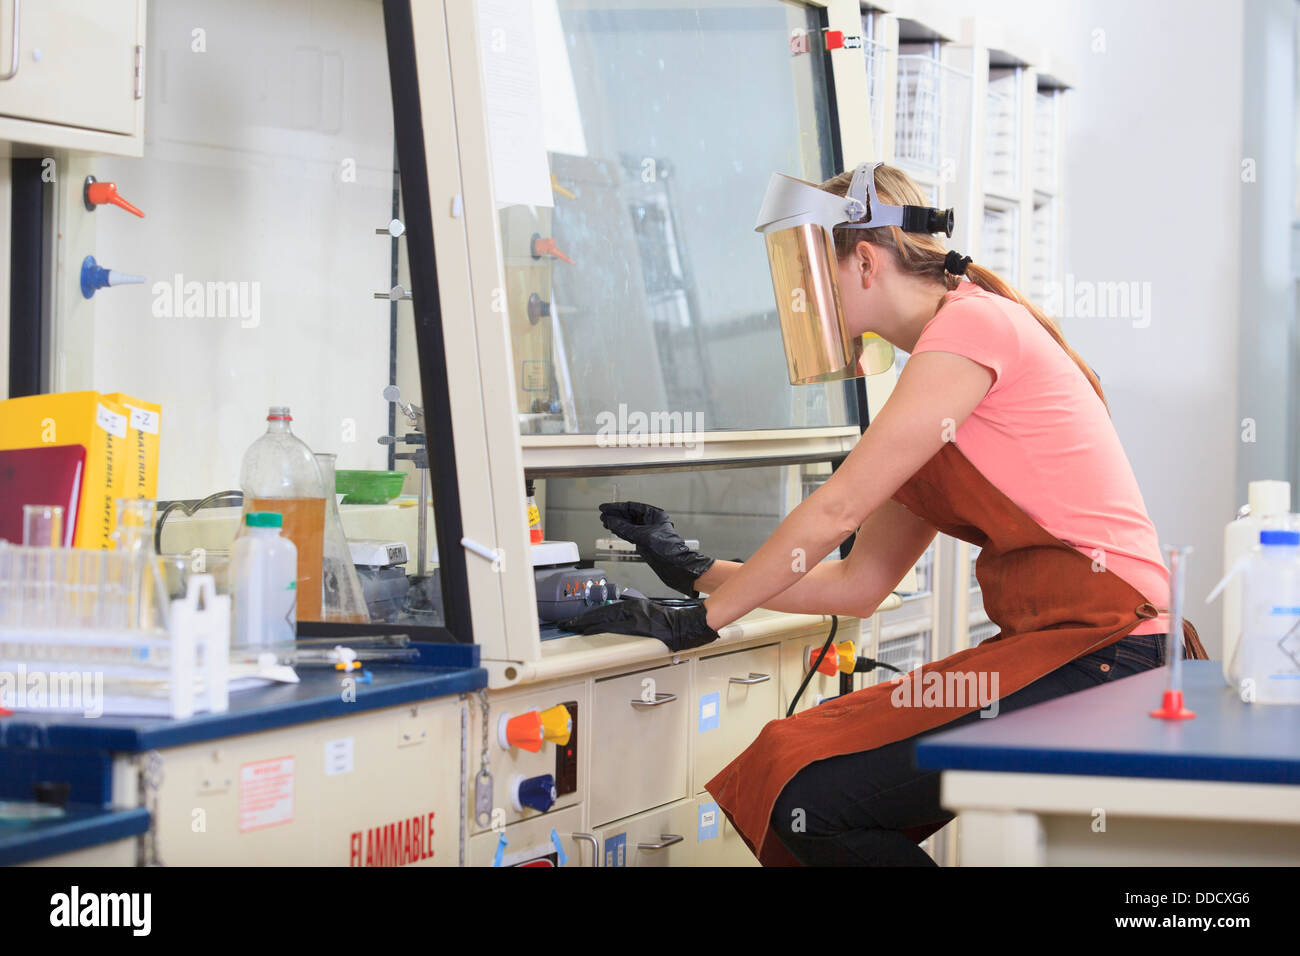 Engineering student wearing protective equipment while working on chemistry experiment in fume hood Stock Photo